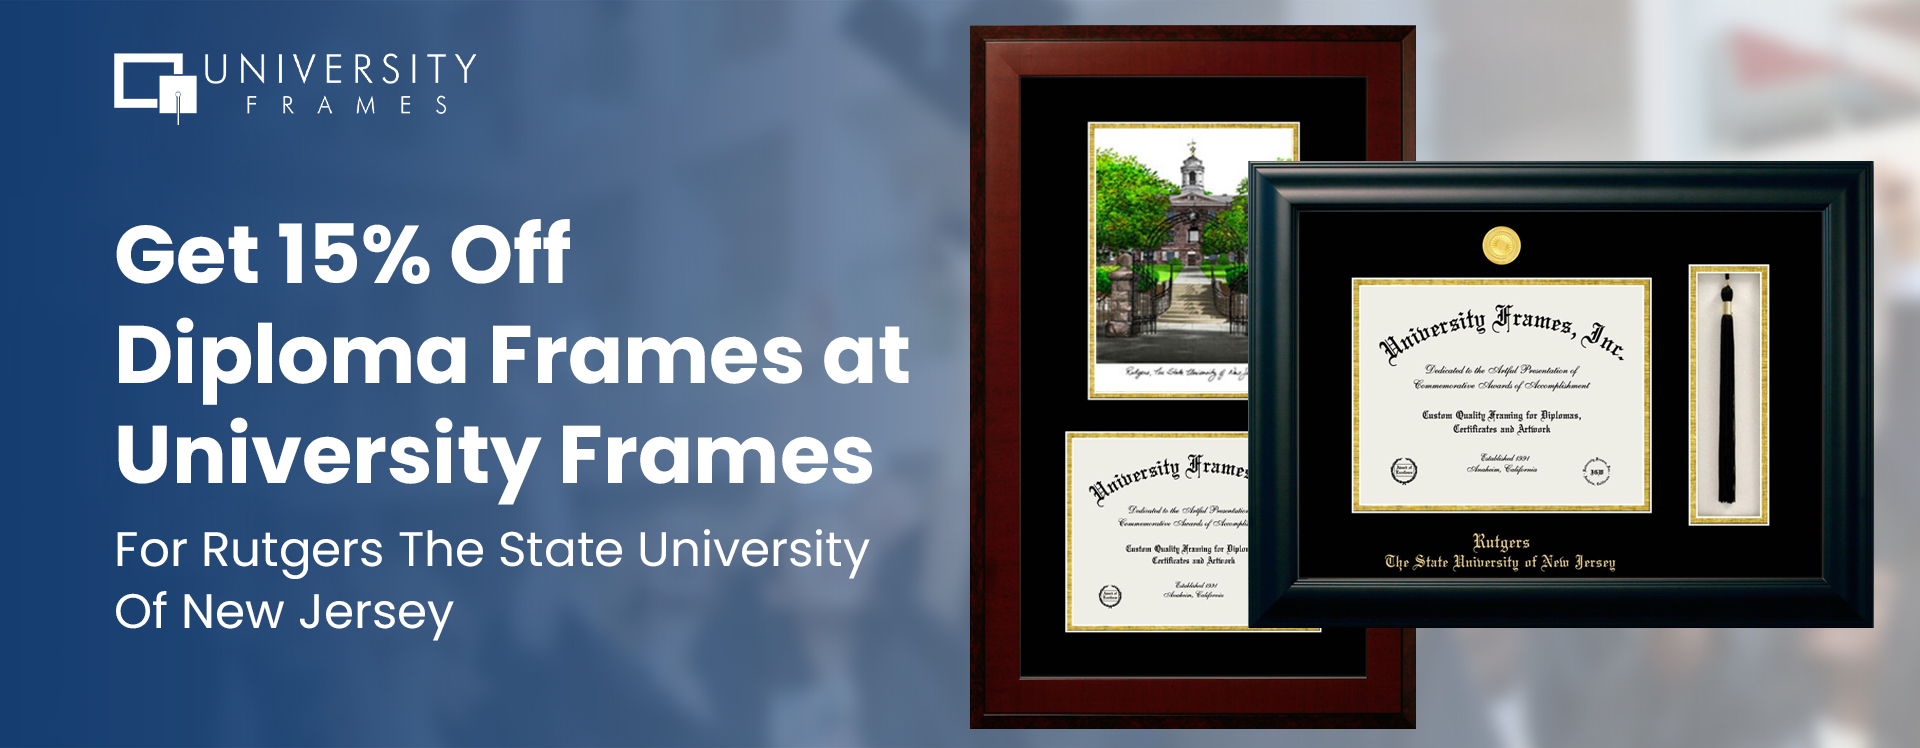 Rutgers The State University Of New Jersey Graduates Can Now Get 15% Off Diploma Frames at University Frames